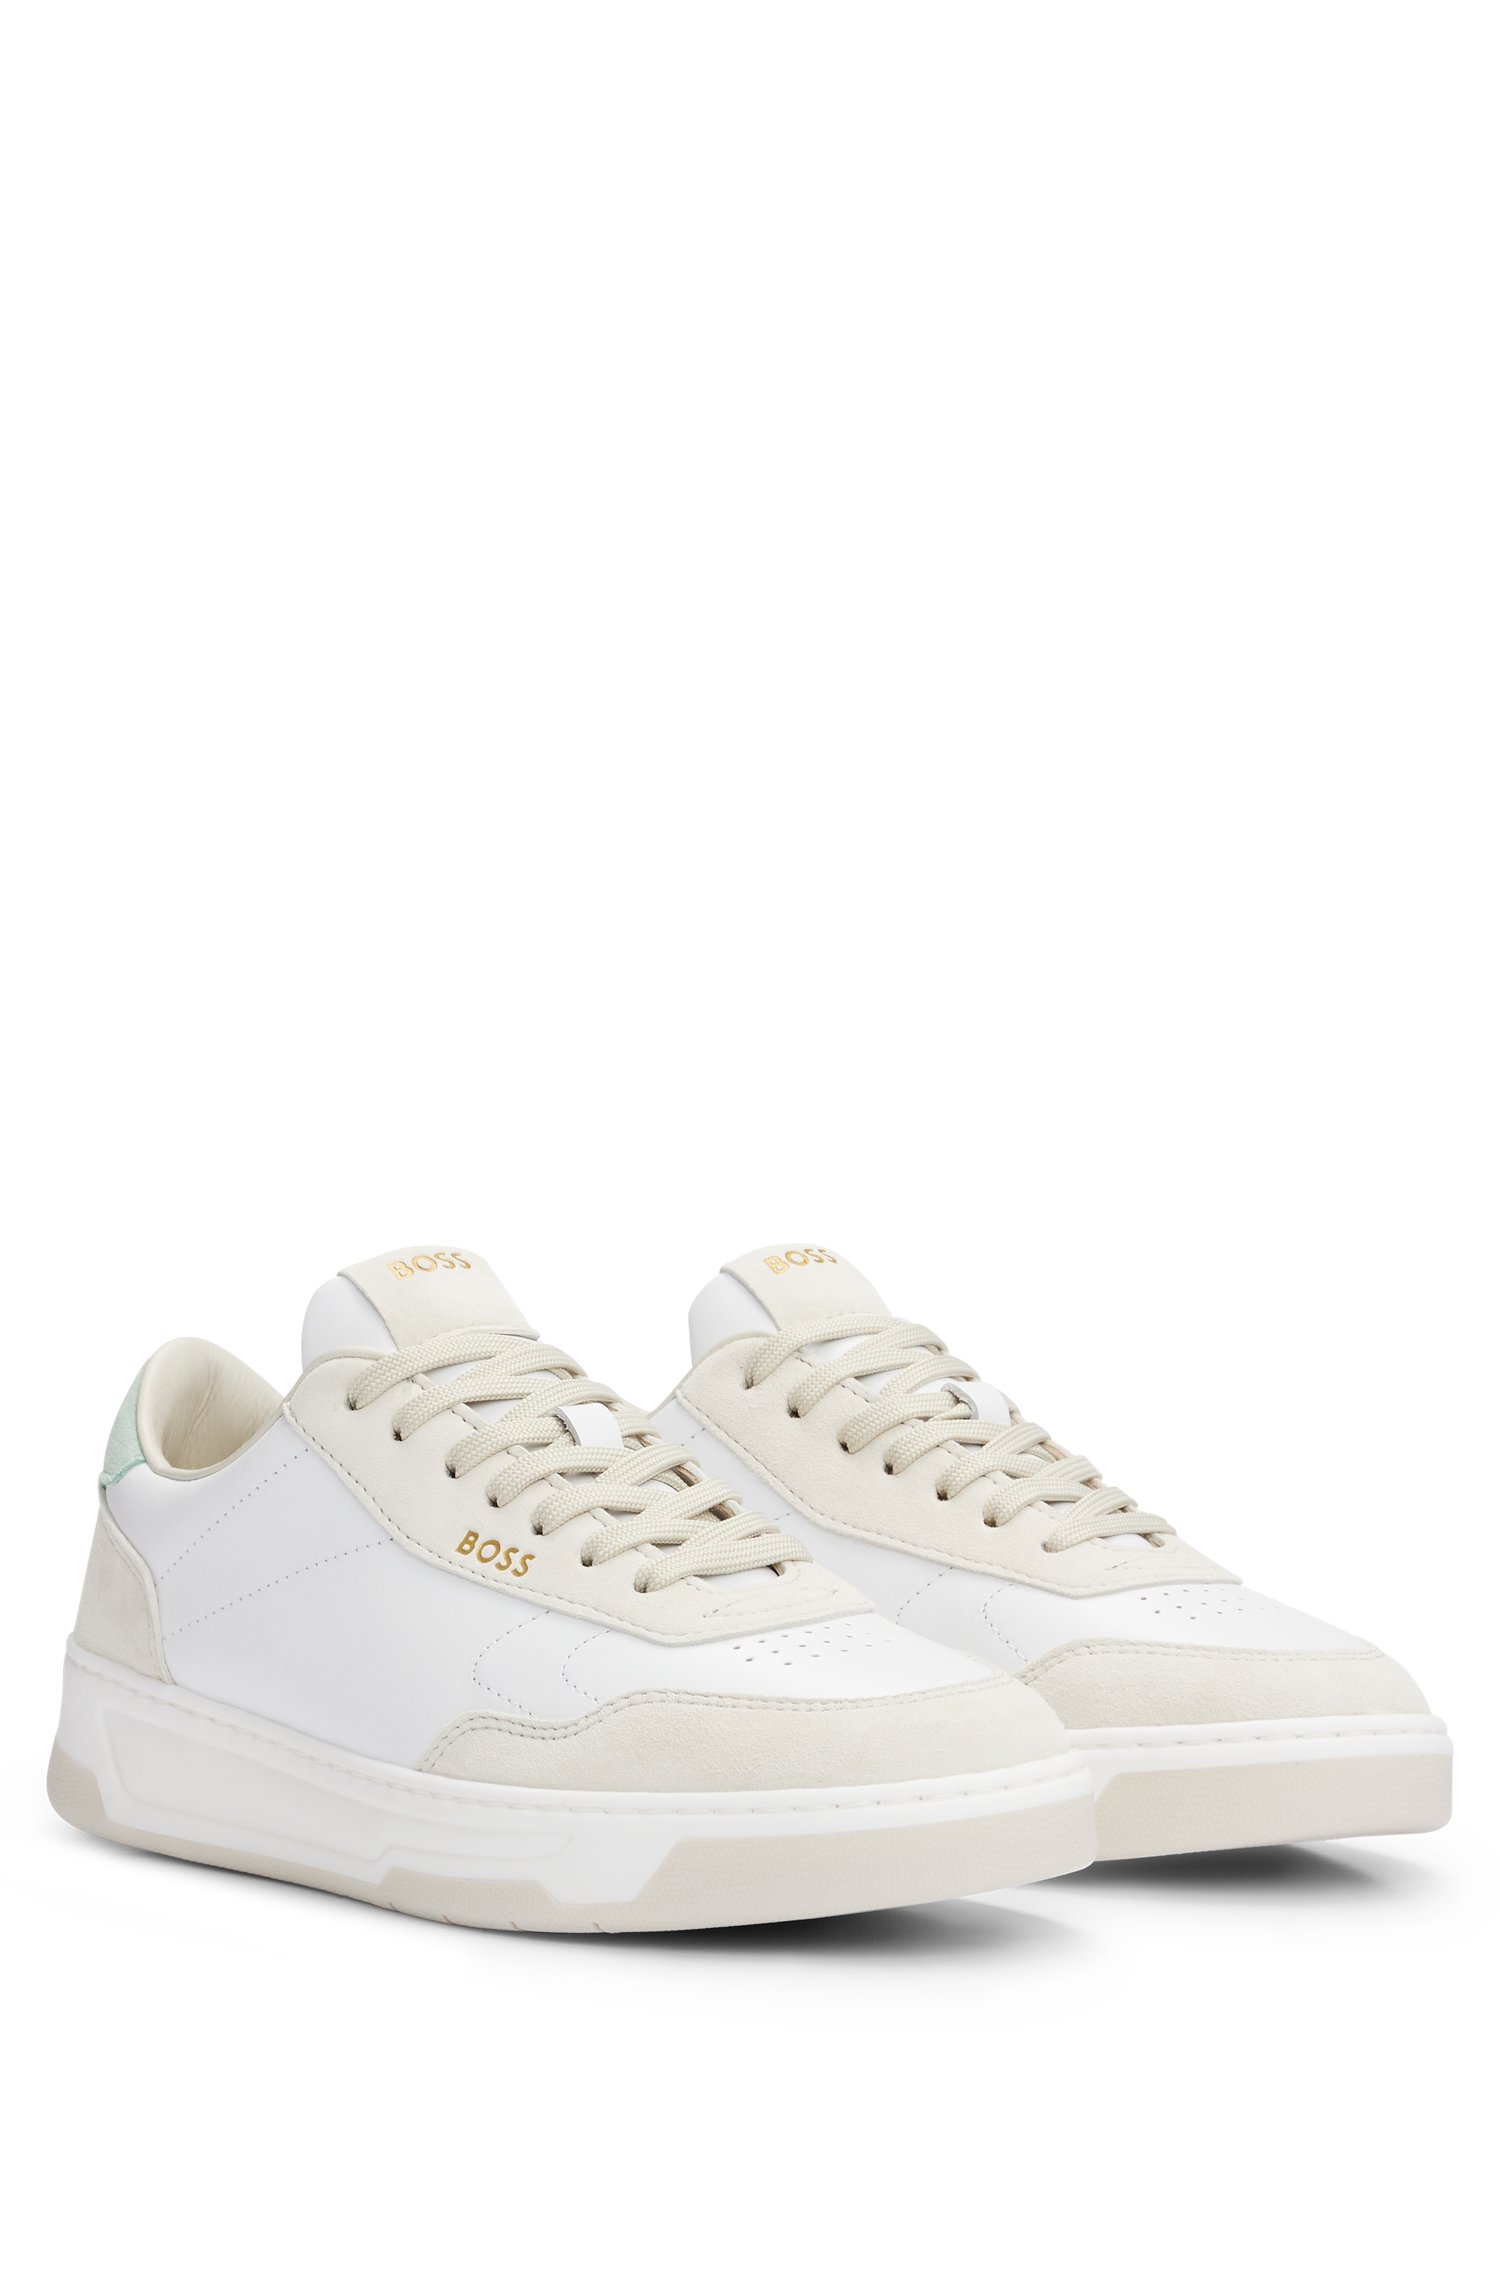 Branded lace-up trainers leather and nubuck